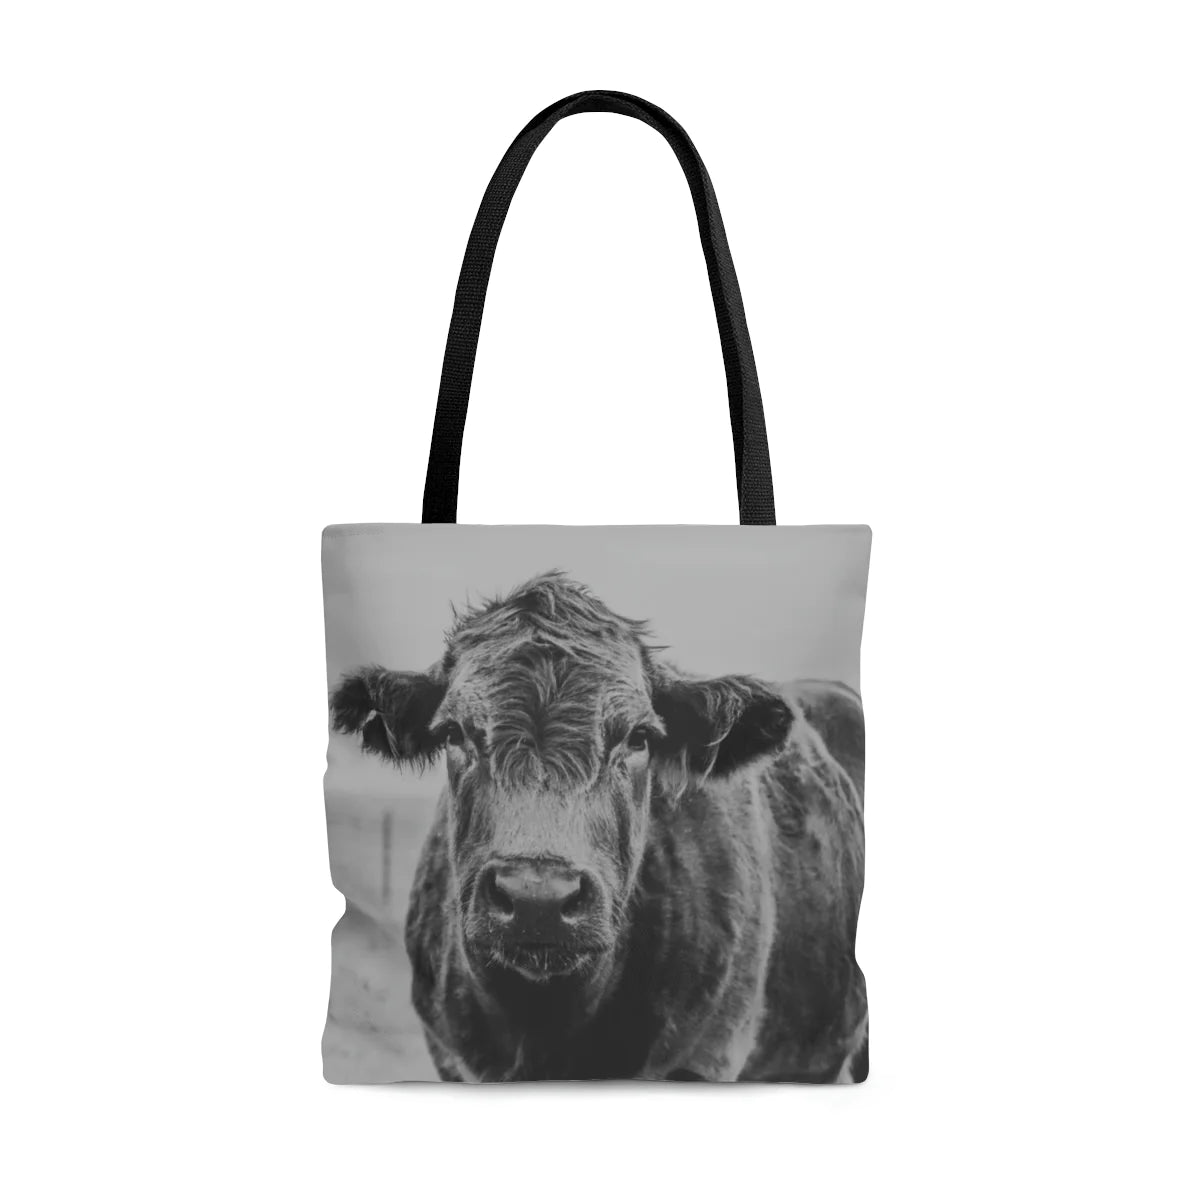 Matriarch of the Herd Reusable Shopping Tote